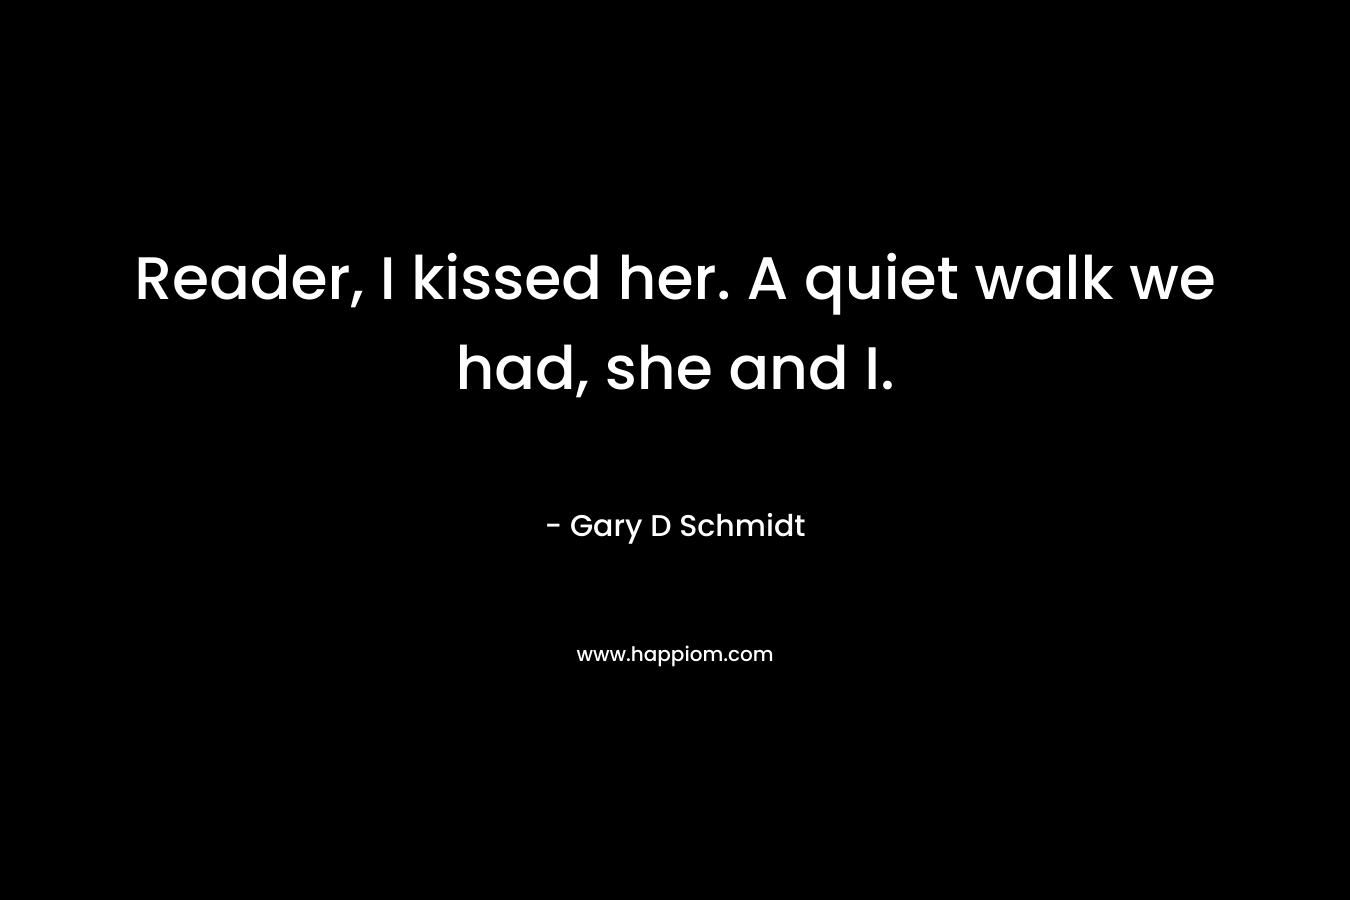 Reader, I kissed her. A quiet walk we had, she and I. – Gary D Schmidt